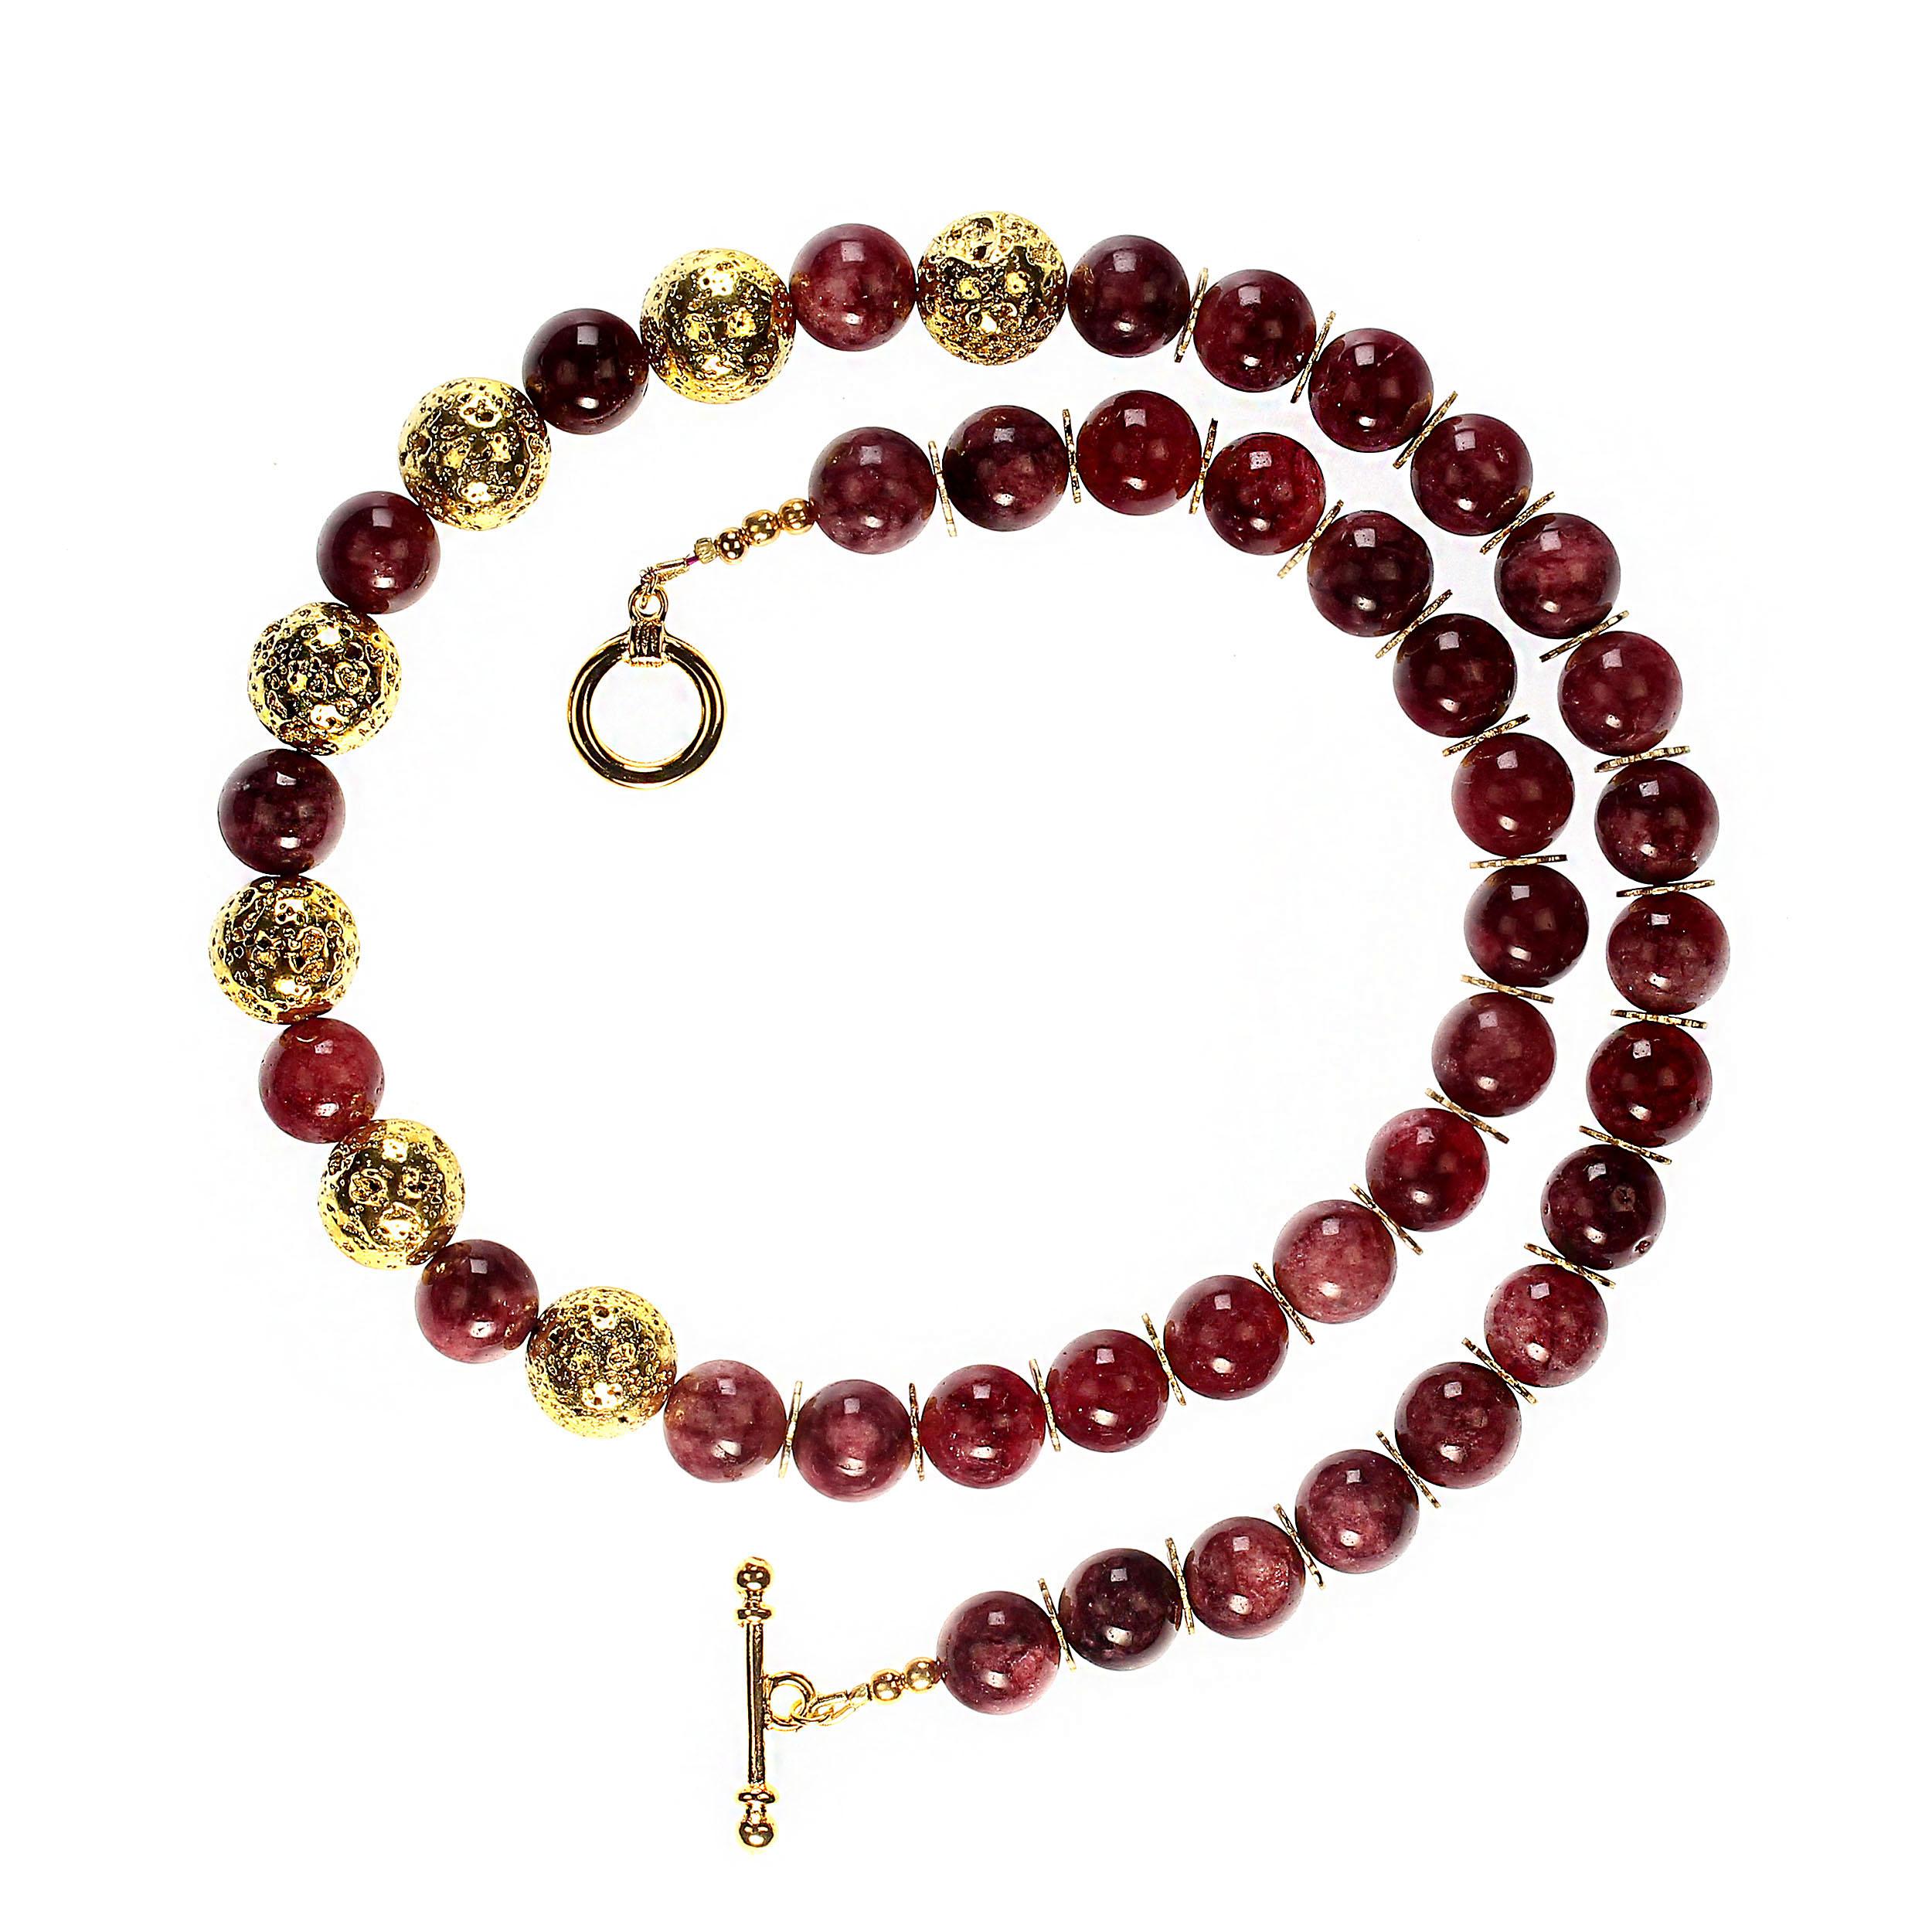 Women's or Men's AJD 21 Inch Gorgeous Garnet Necklace Perfect for the January Birthday! For Sale